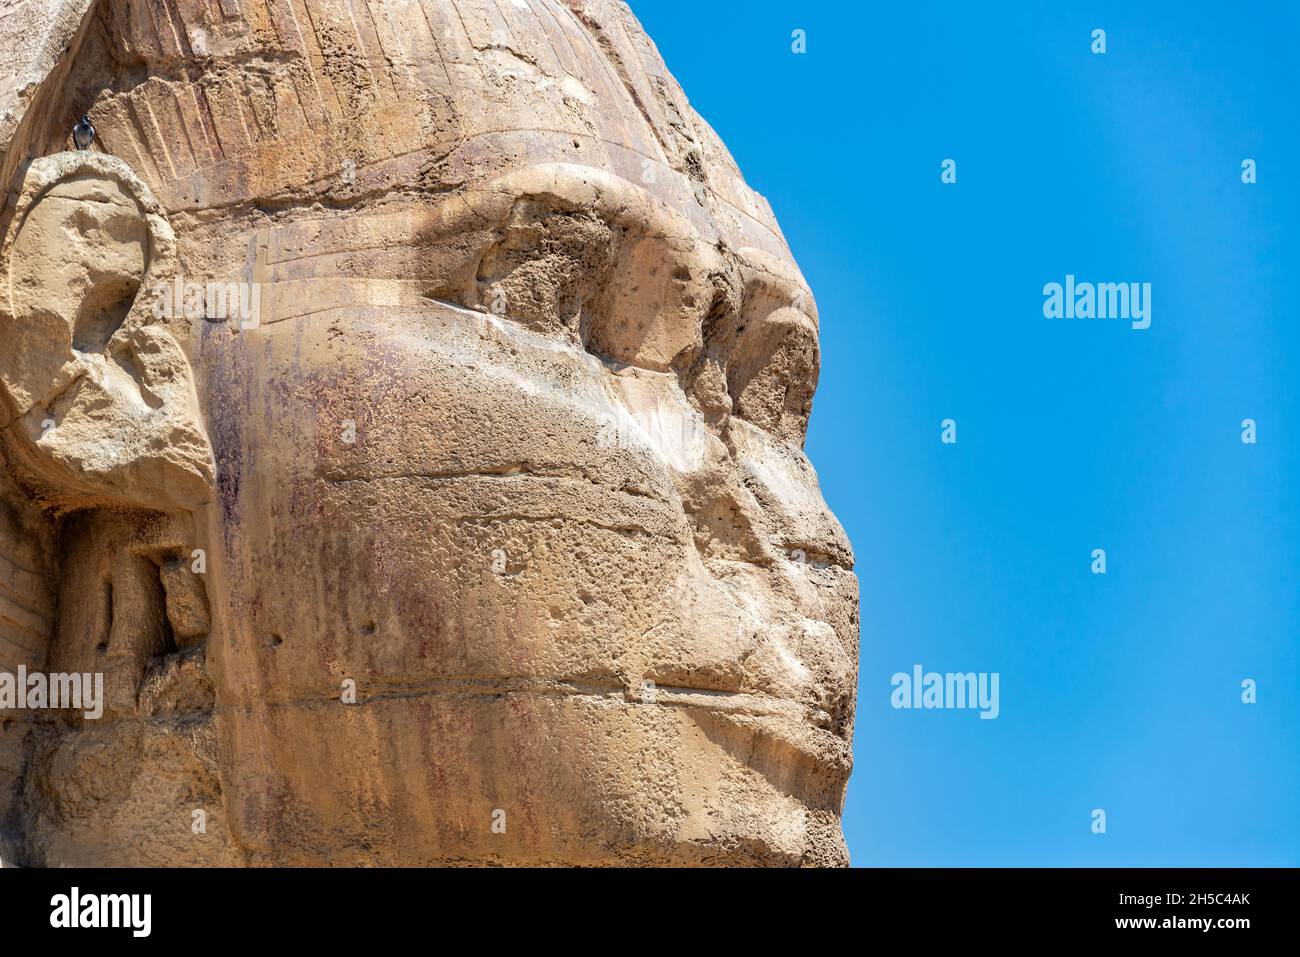 Closeup view of the face of the Great Sphinx of Giza in Egypt Stock Photo